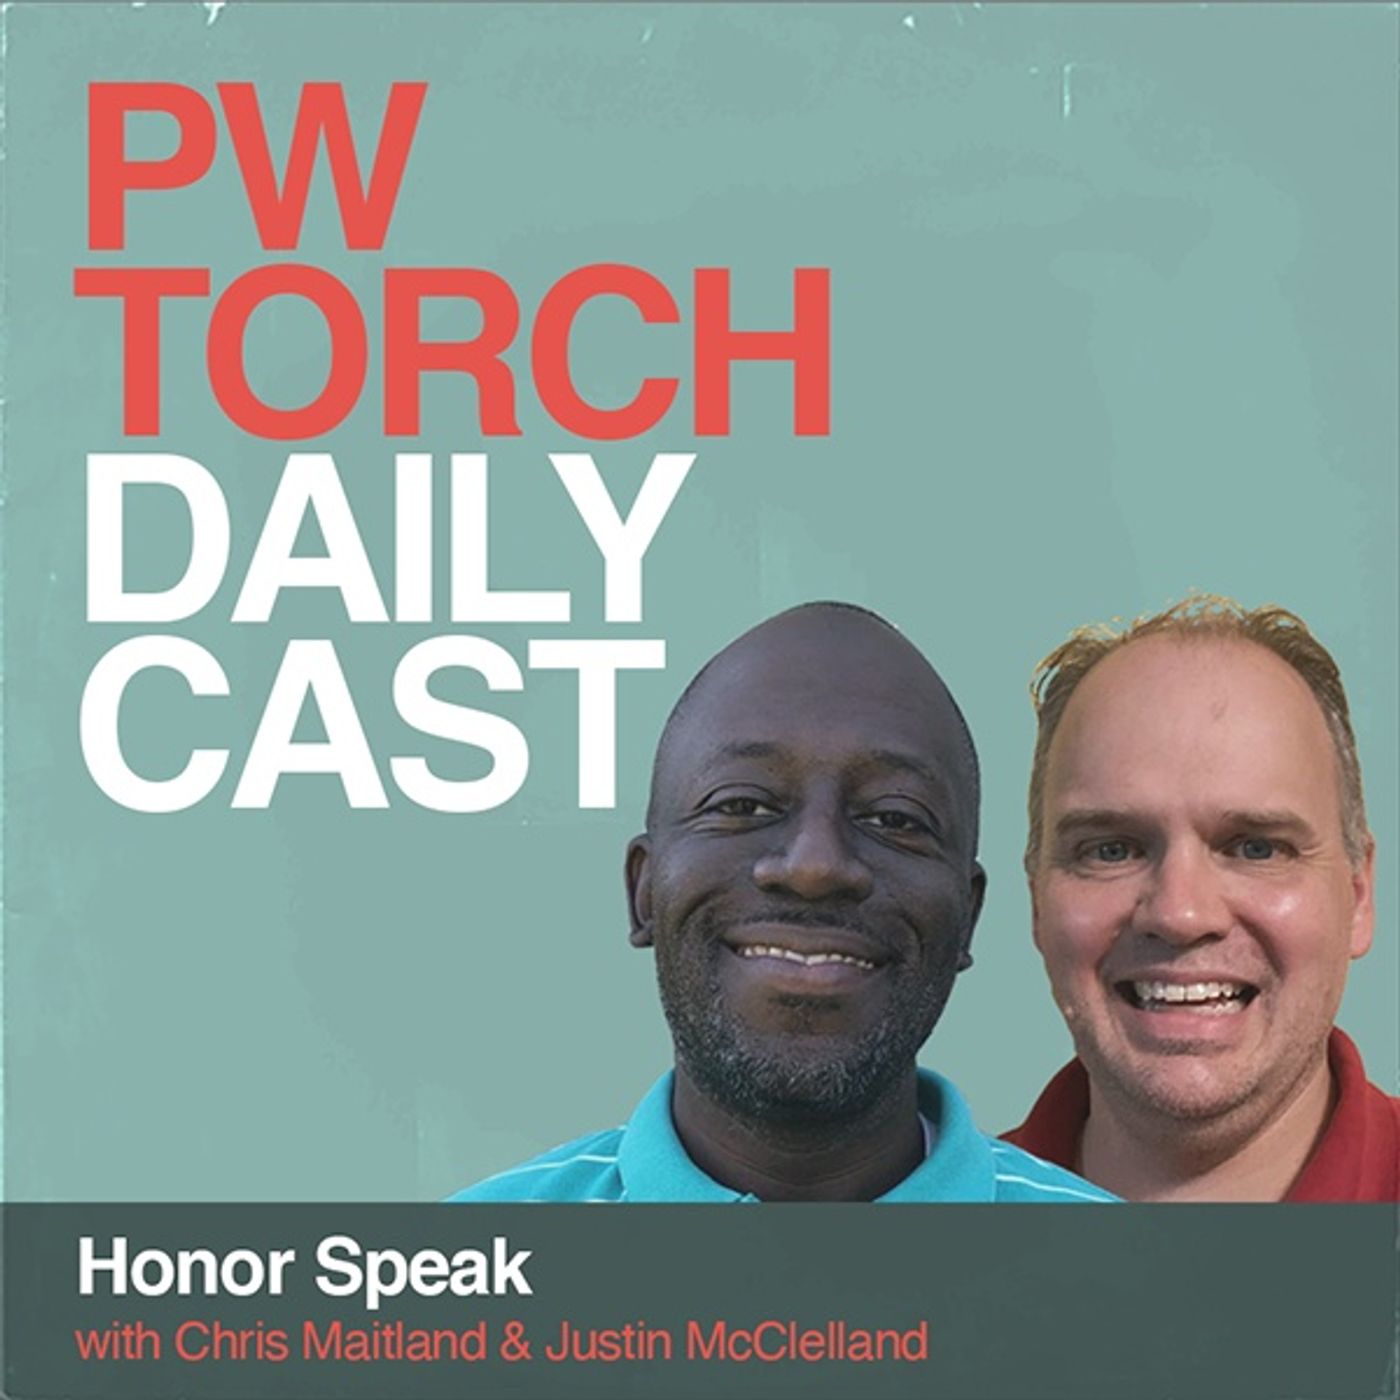 PWTorch Dailycast - Honor Speak - Maitland & McClelland talk ROH announcing ticket on sale date for Final Battle, SOS vs. LFI, more